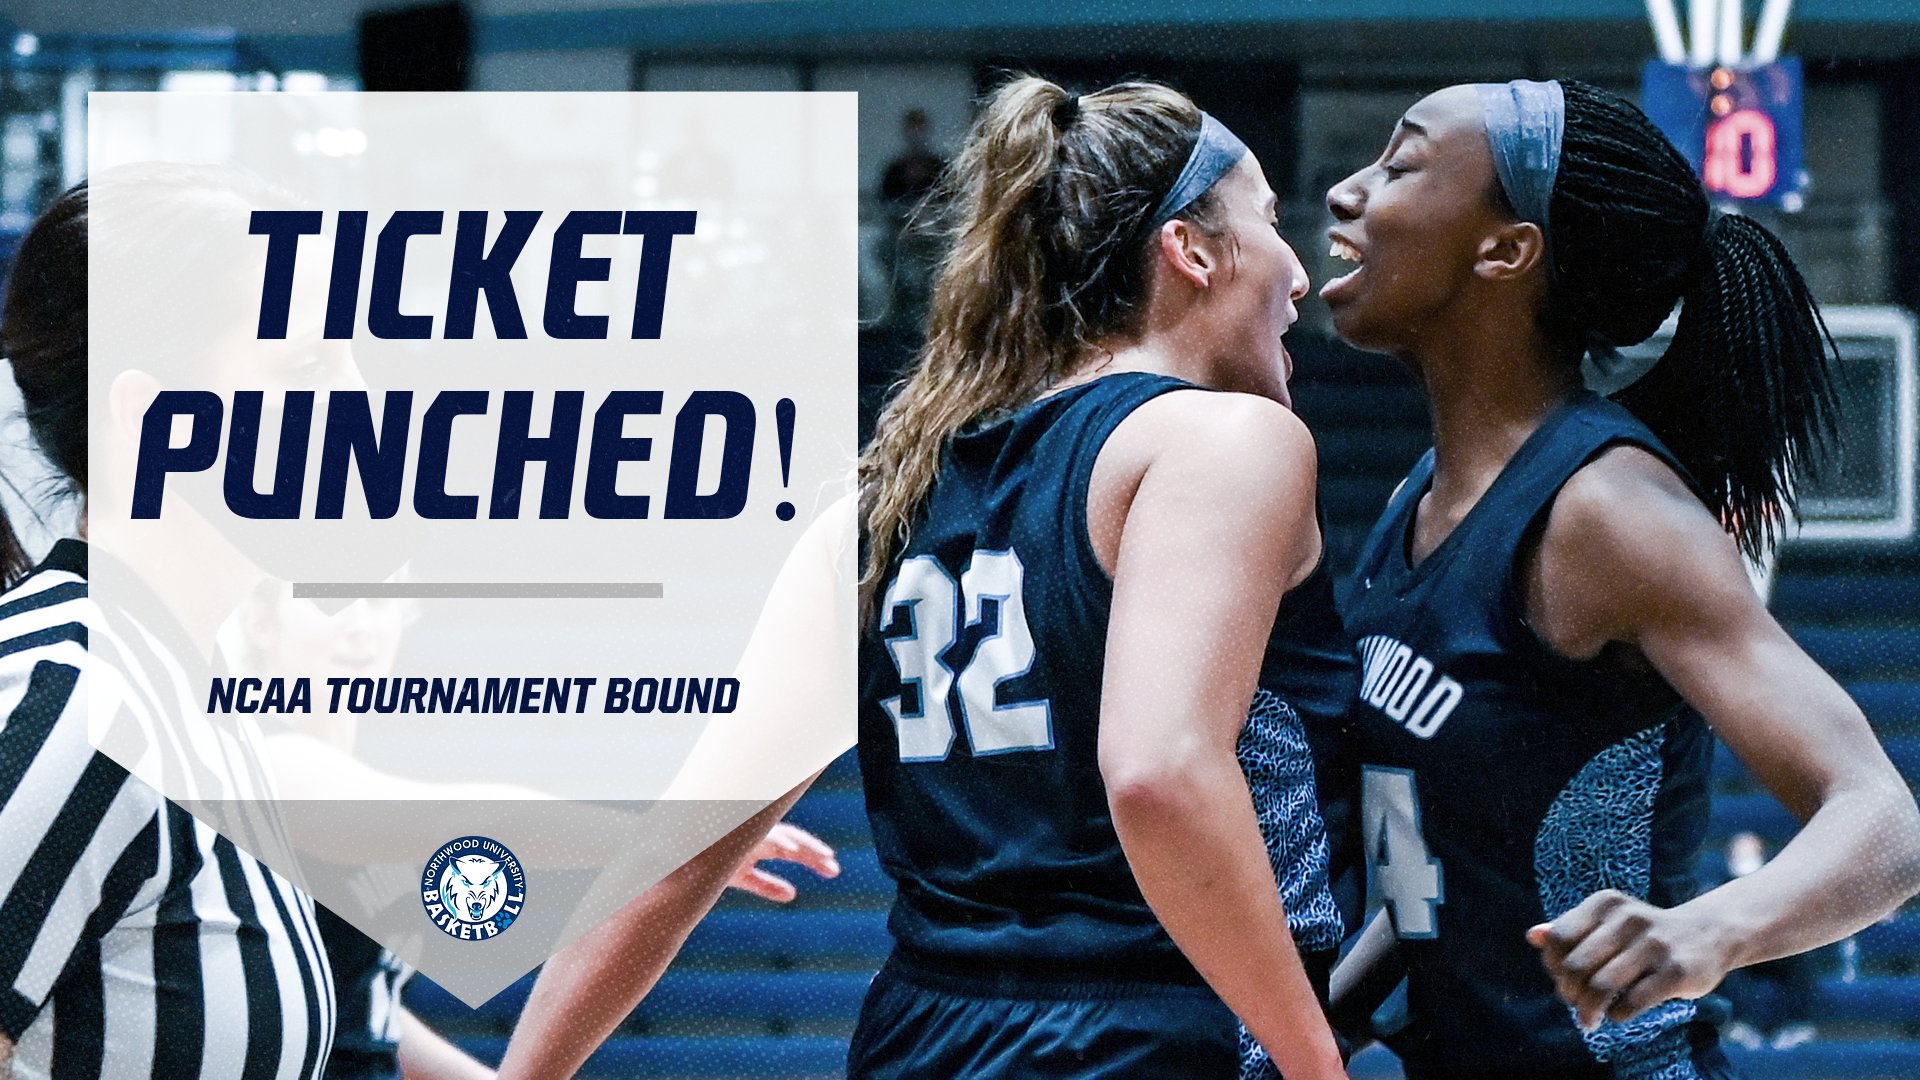 TICKET PUNCHED! Women's Basketball Earns Trip To NCAA Tournament